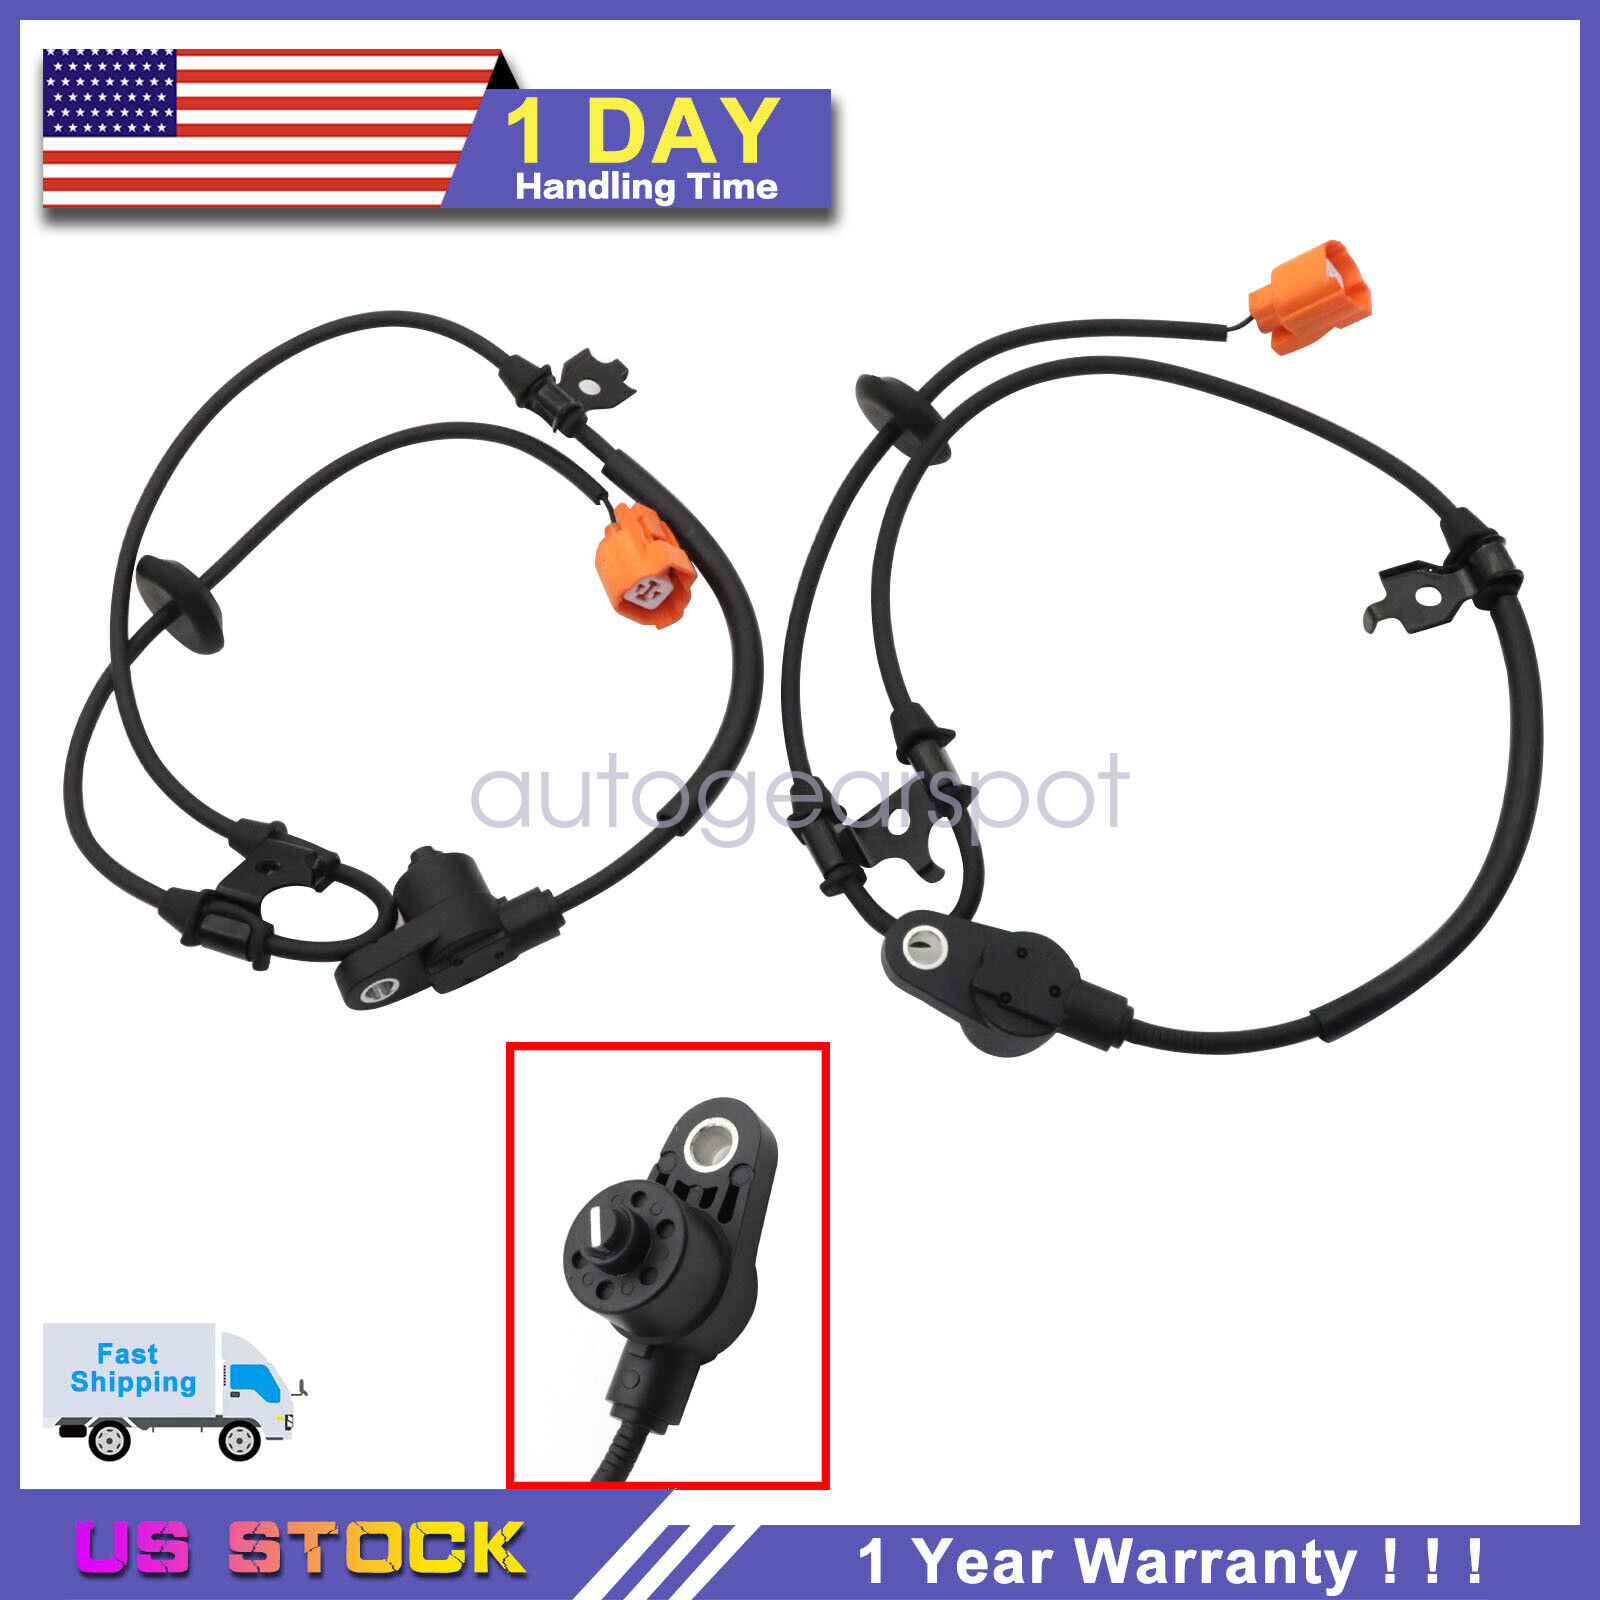 2x New ABS Speed Sensor For Honda Pilot 03-08 Front Driver and Passenger Side